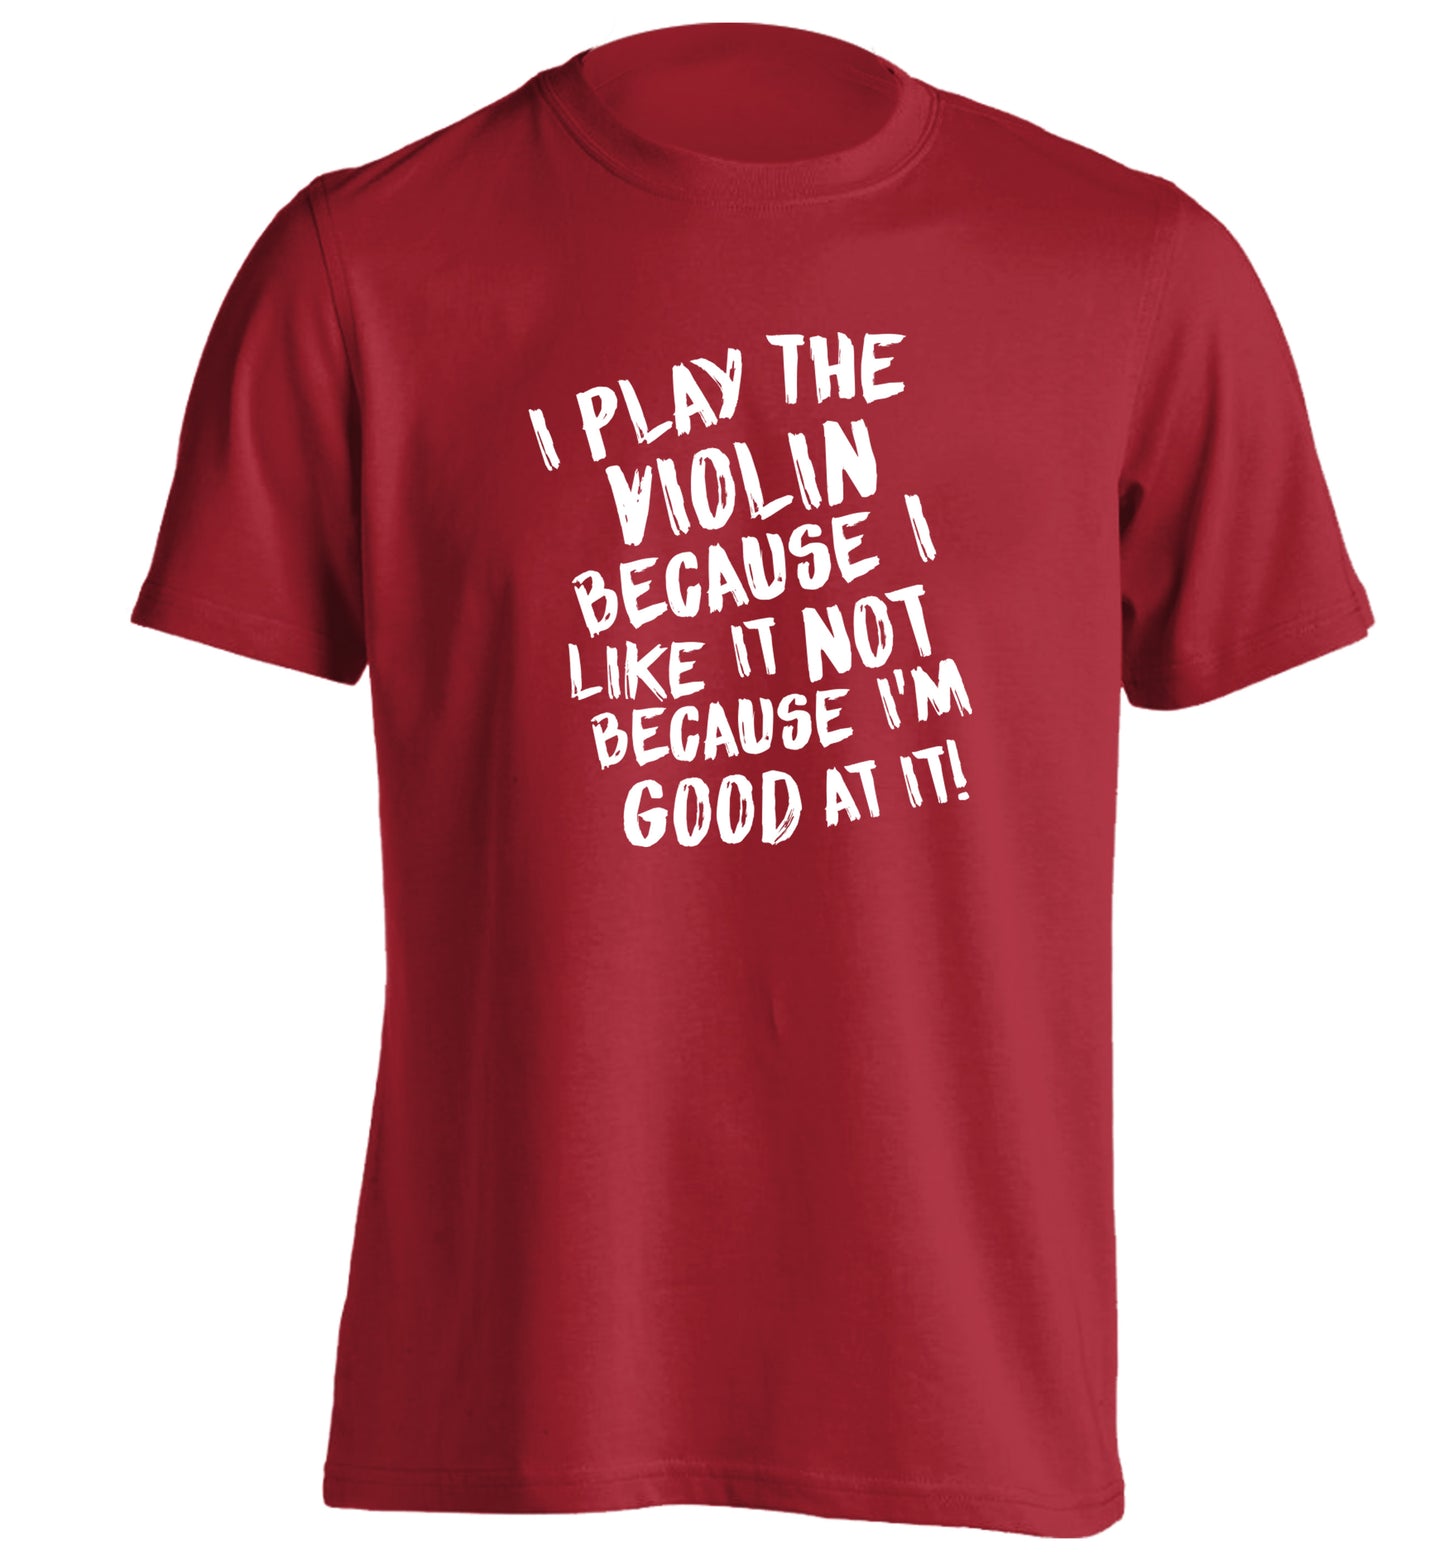 I play the violin because I like it not because I'm good at it adults unisex red Tshirt 2XL